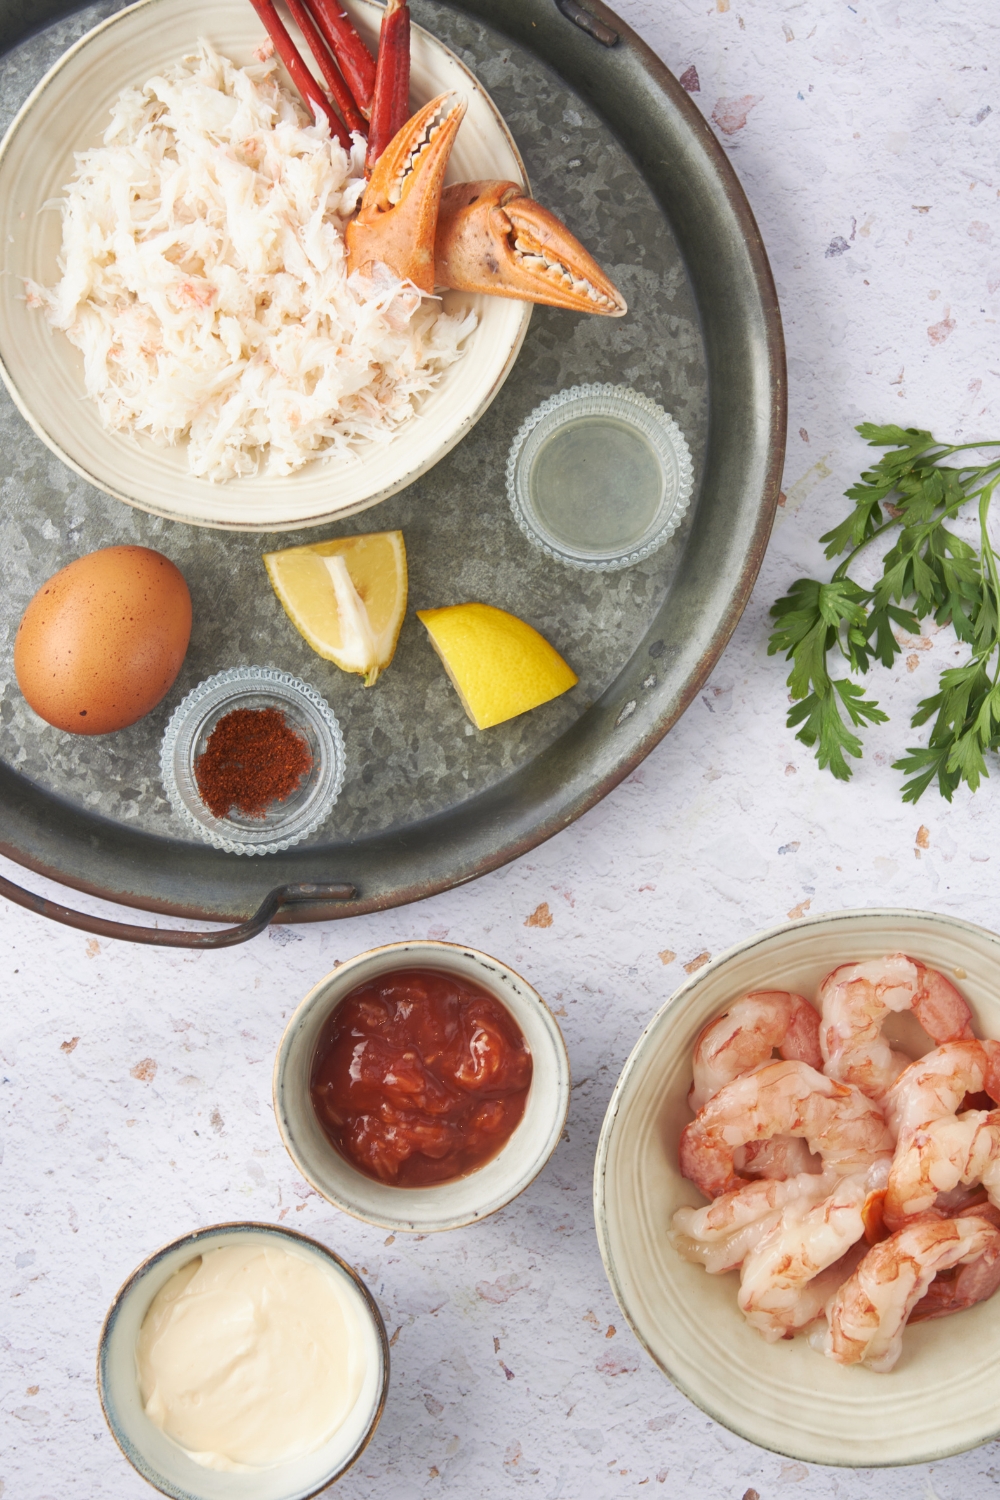 An assortment of ingredients including bowls of raw shrimp, cocktail sauce, mayonnaise, crab meat, spices, a couple of lemon wedges, and an egg.